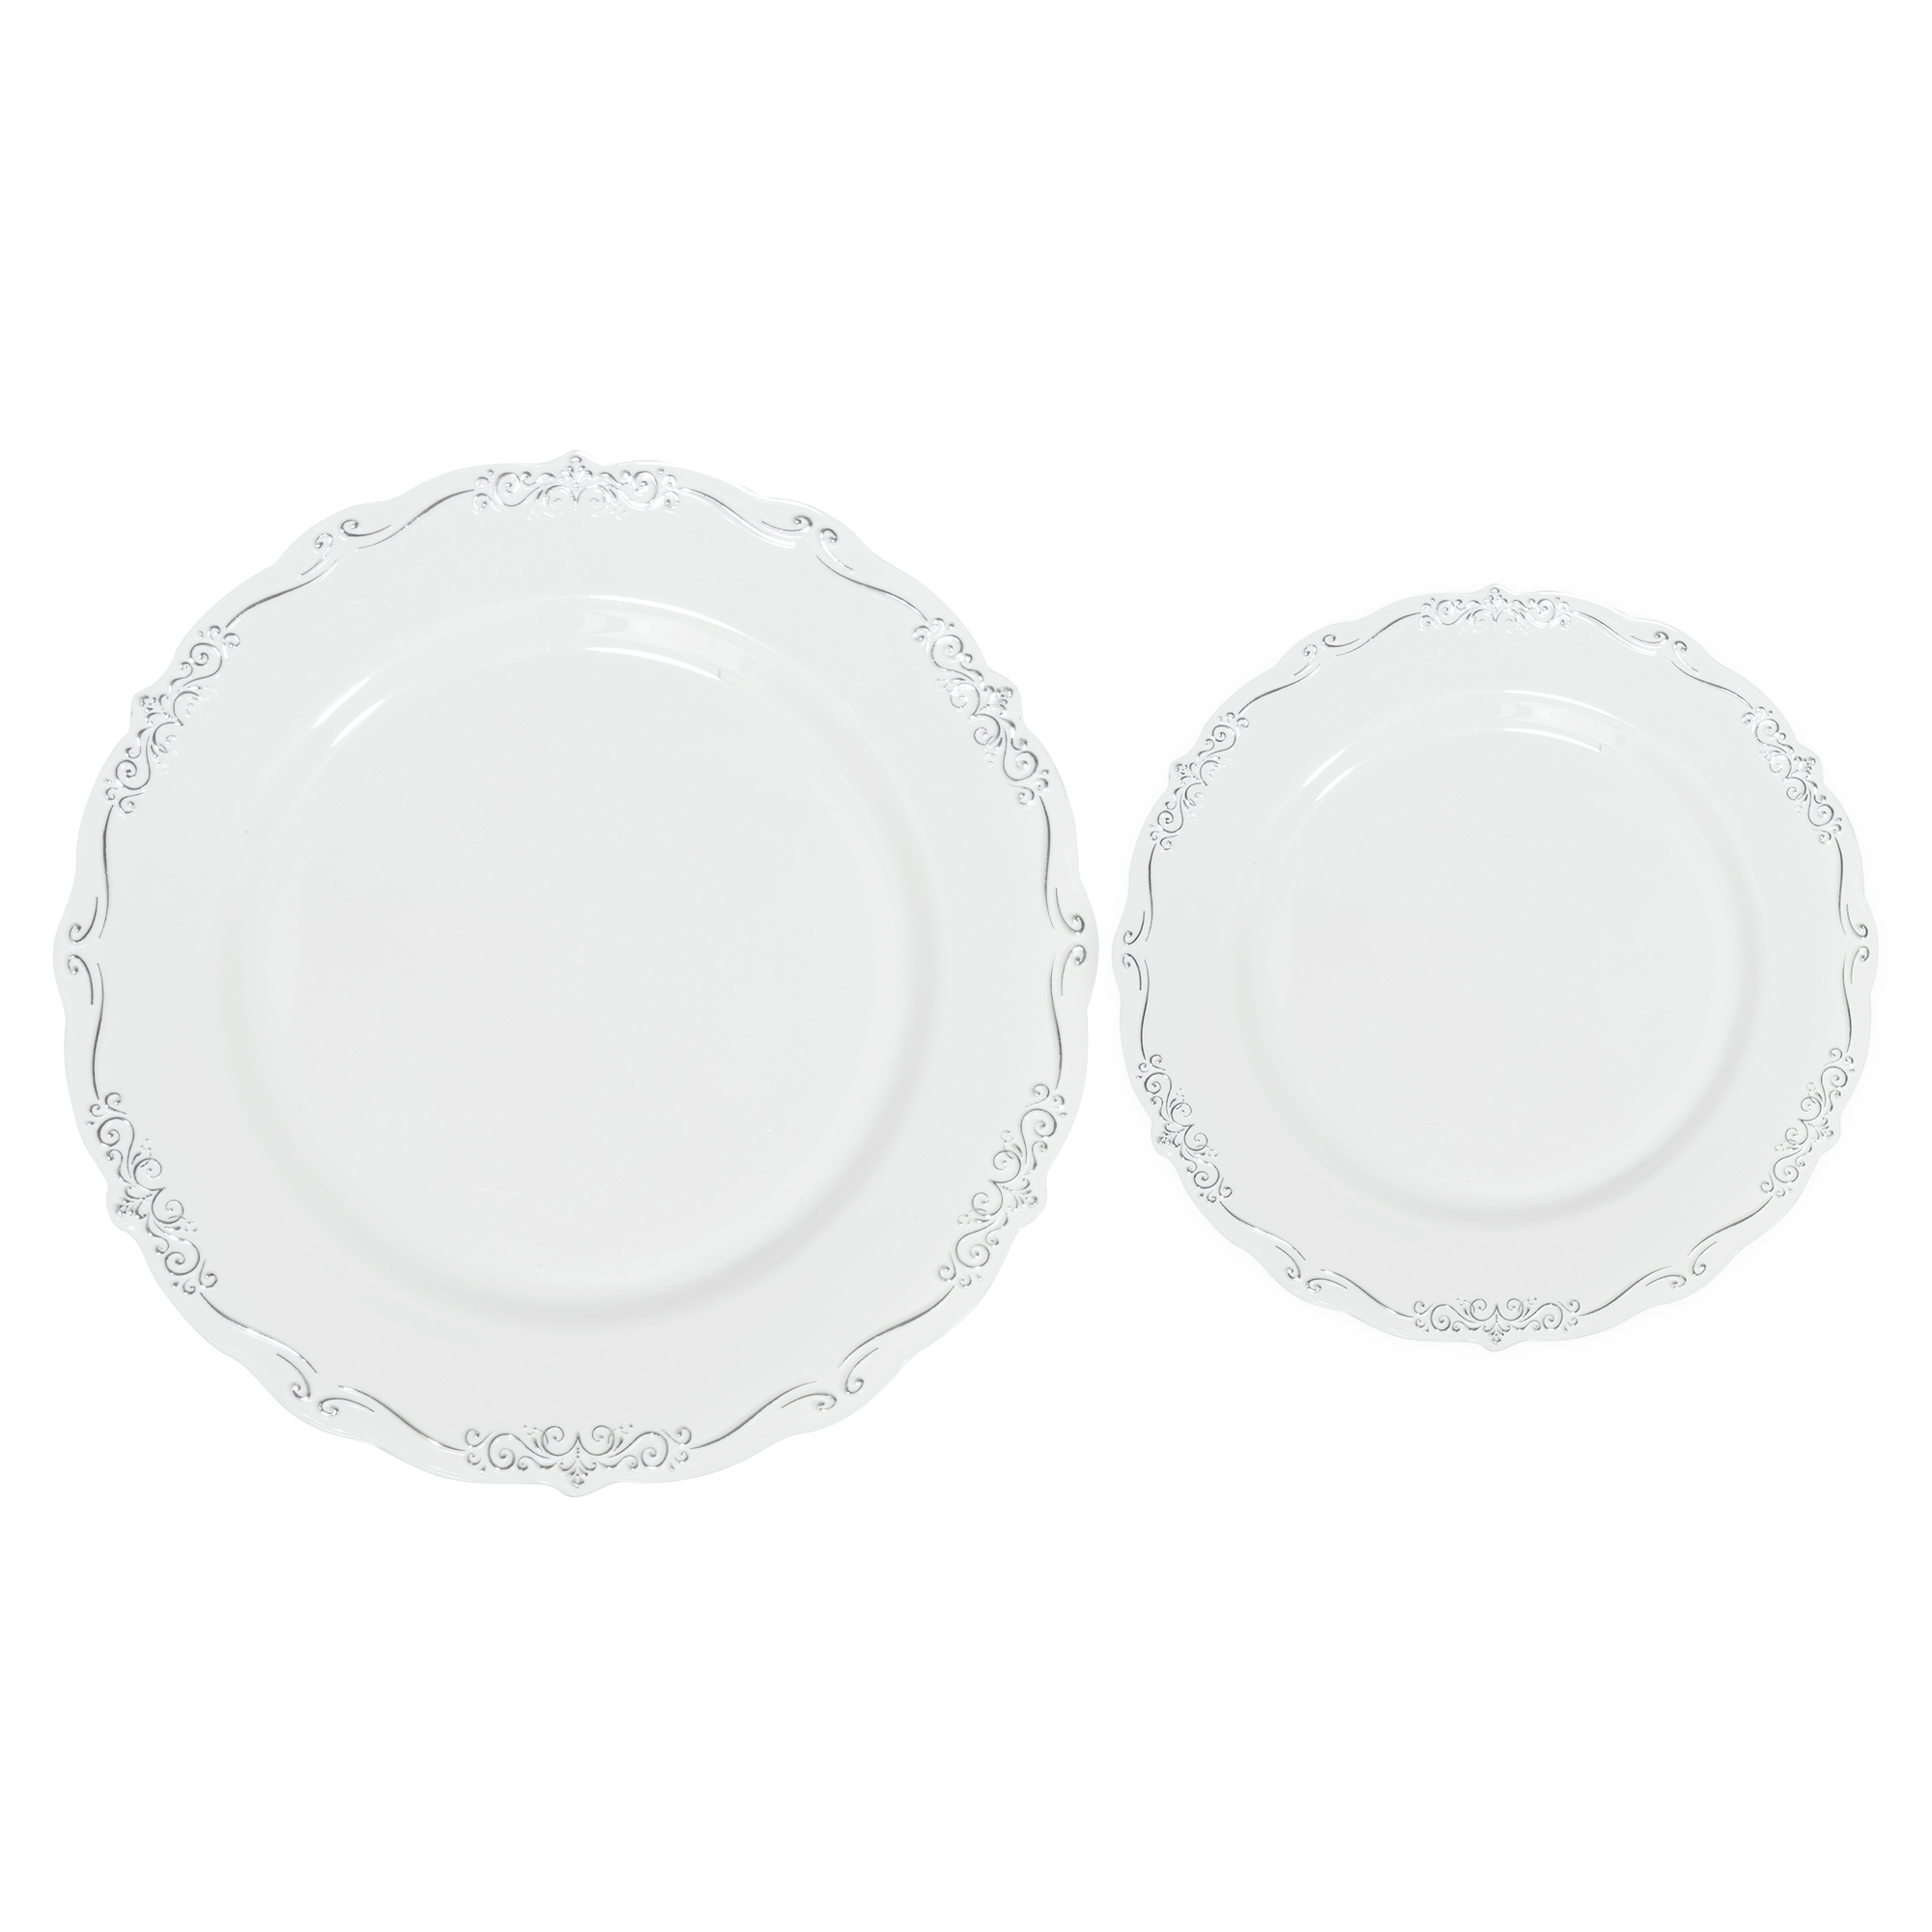 Disposable Deluxe Embossed Plate Set 40pc/set - Silver